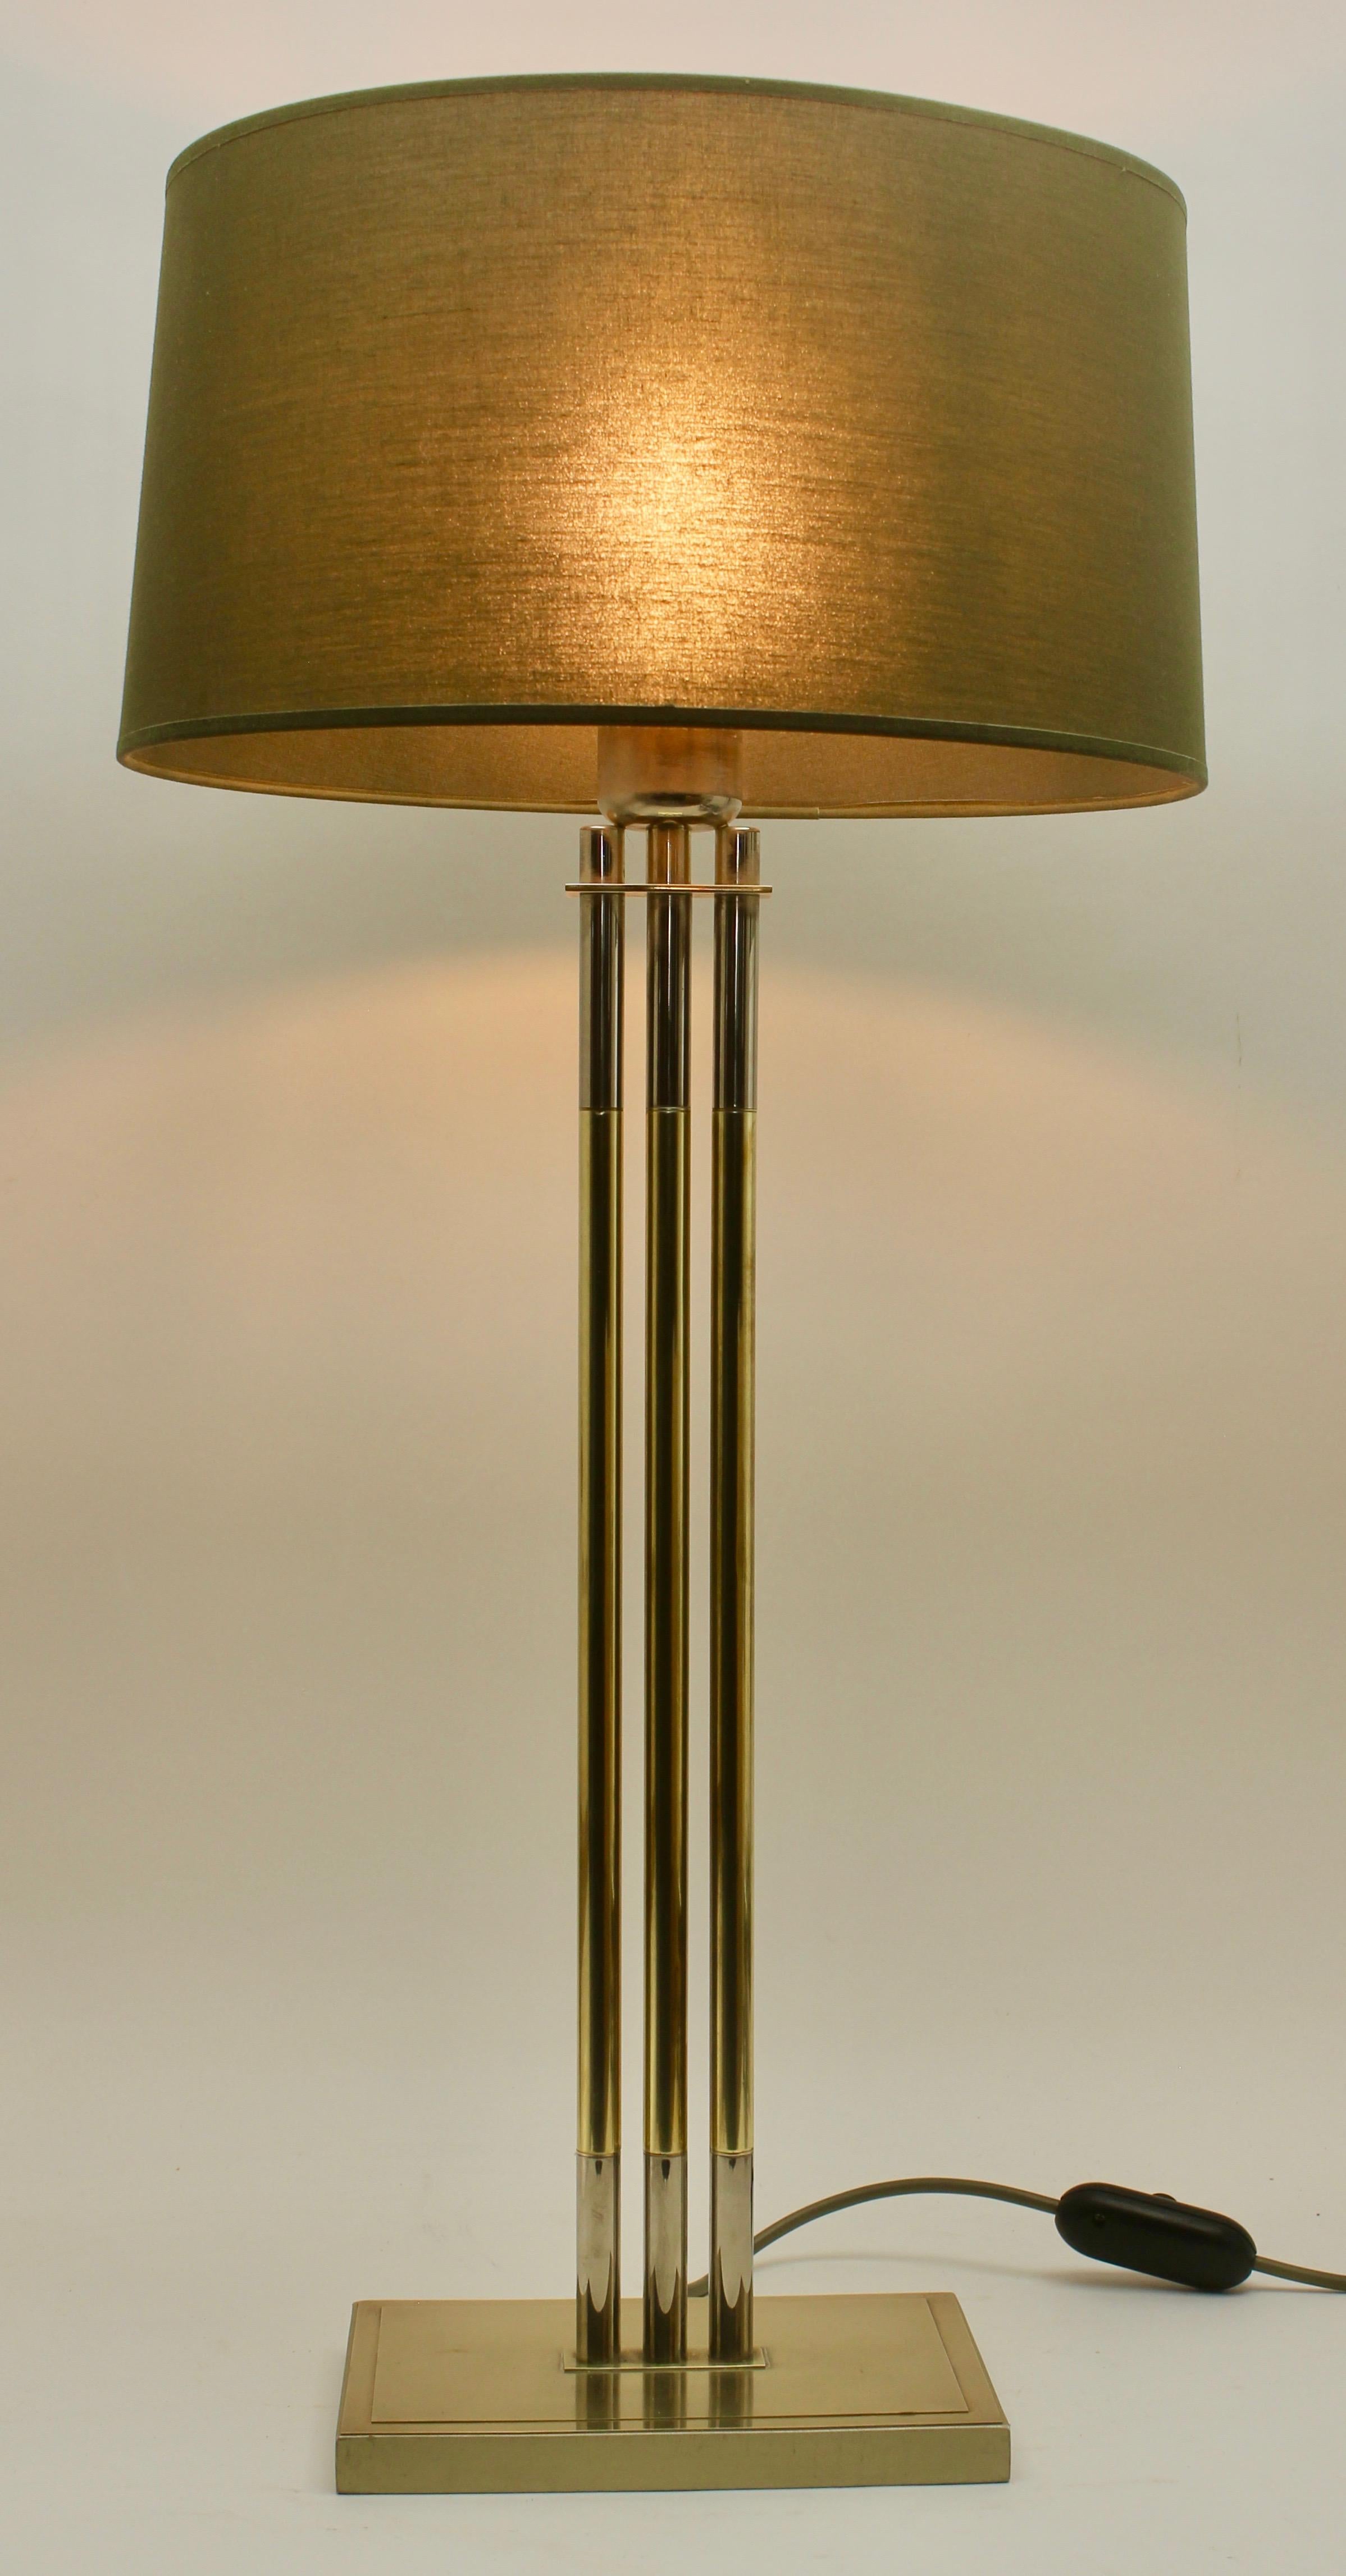 Vintage design
This 1970s table lamp by Lusterie De knudt Belgium features three brass columns with chrome details.
Patina consistent with age and use
Labeled by maker, numbered 3784

Important: The lampshade is included in photos for illustration